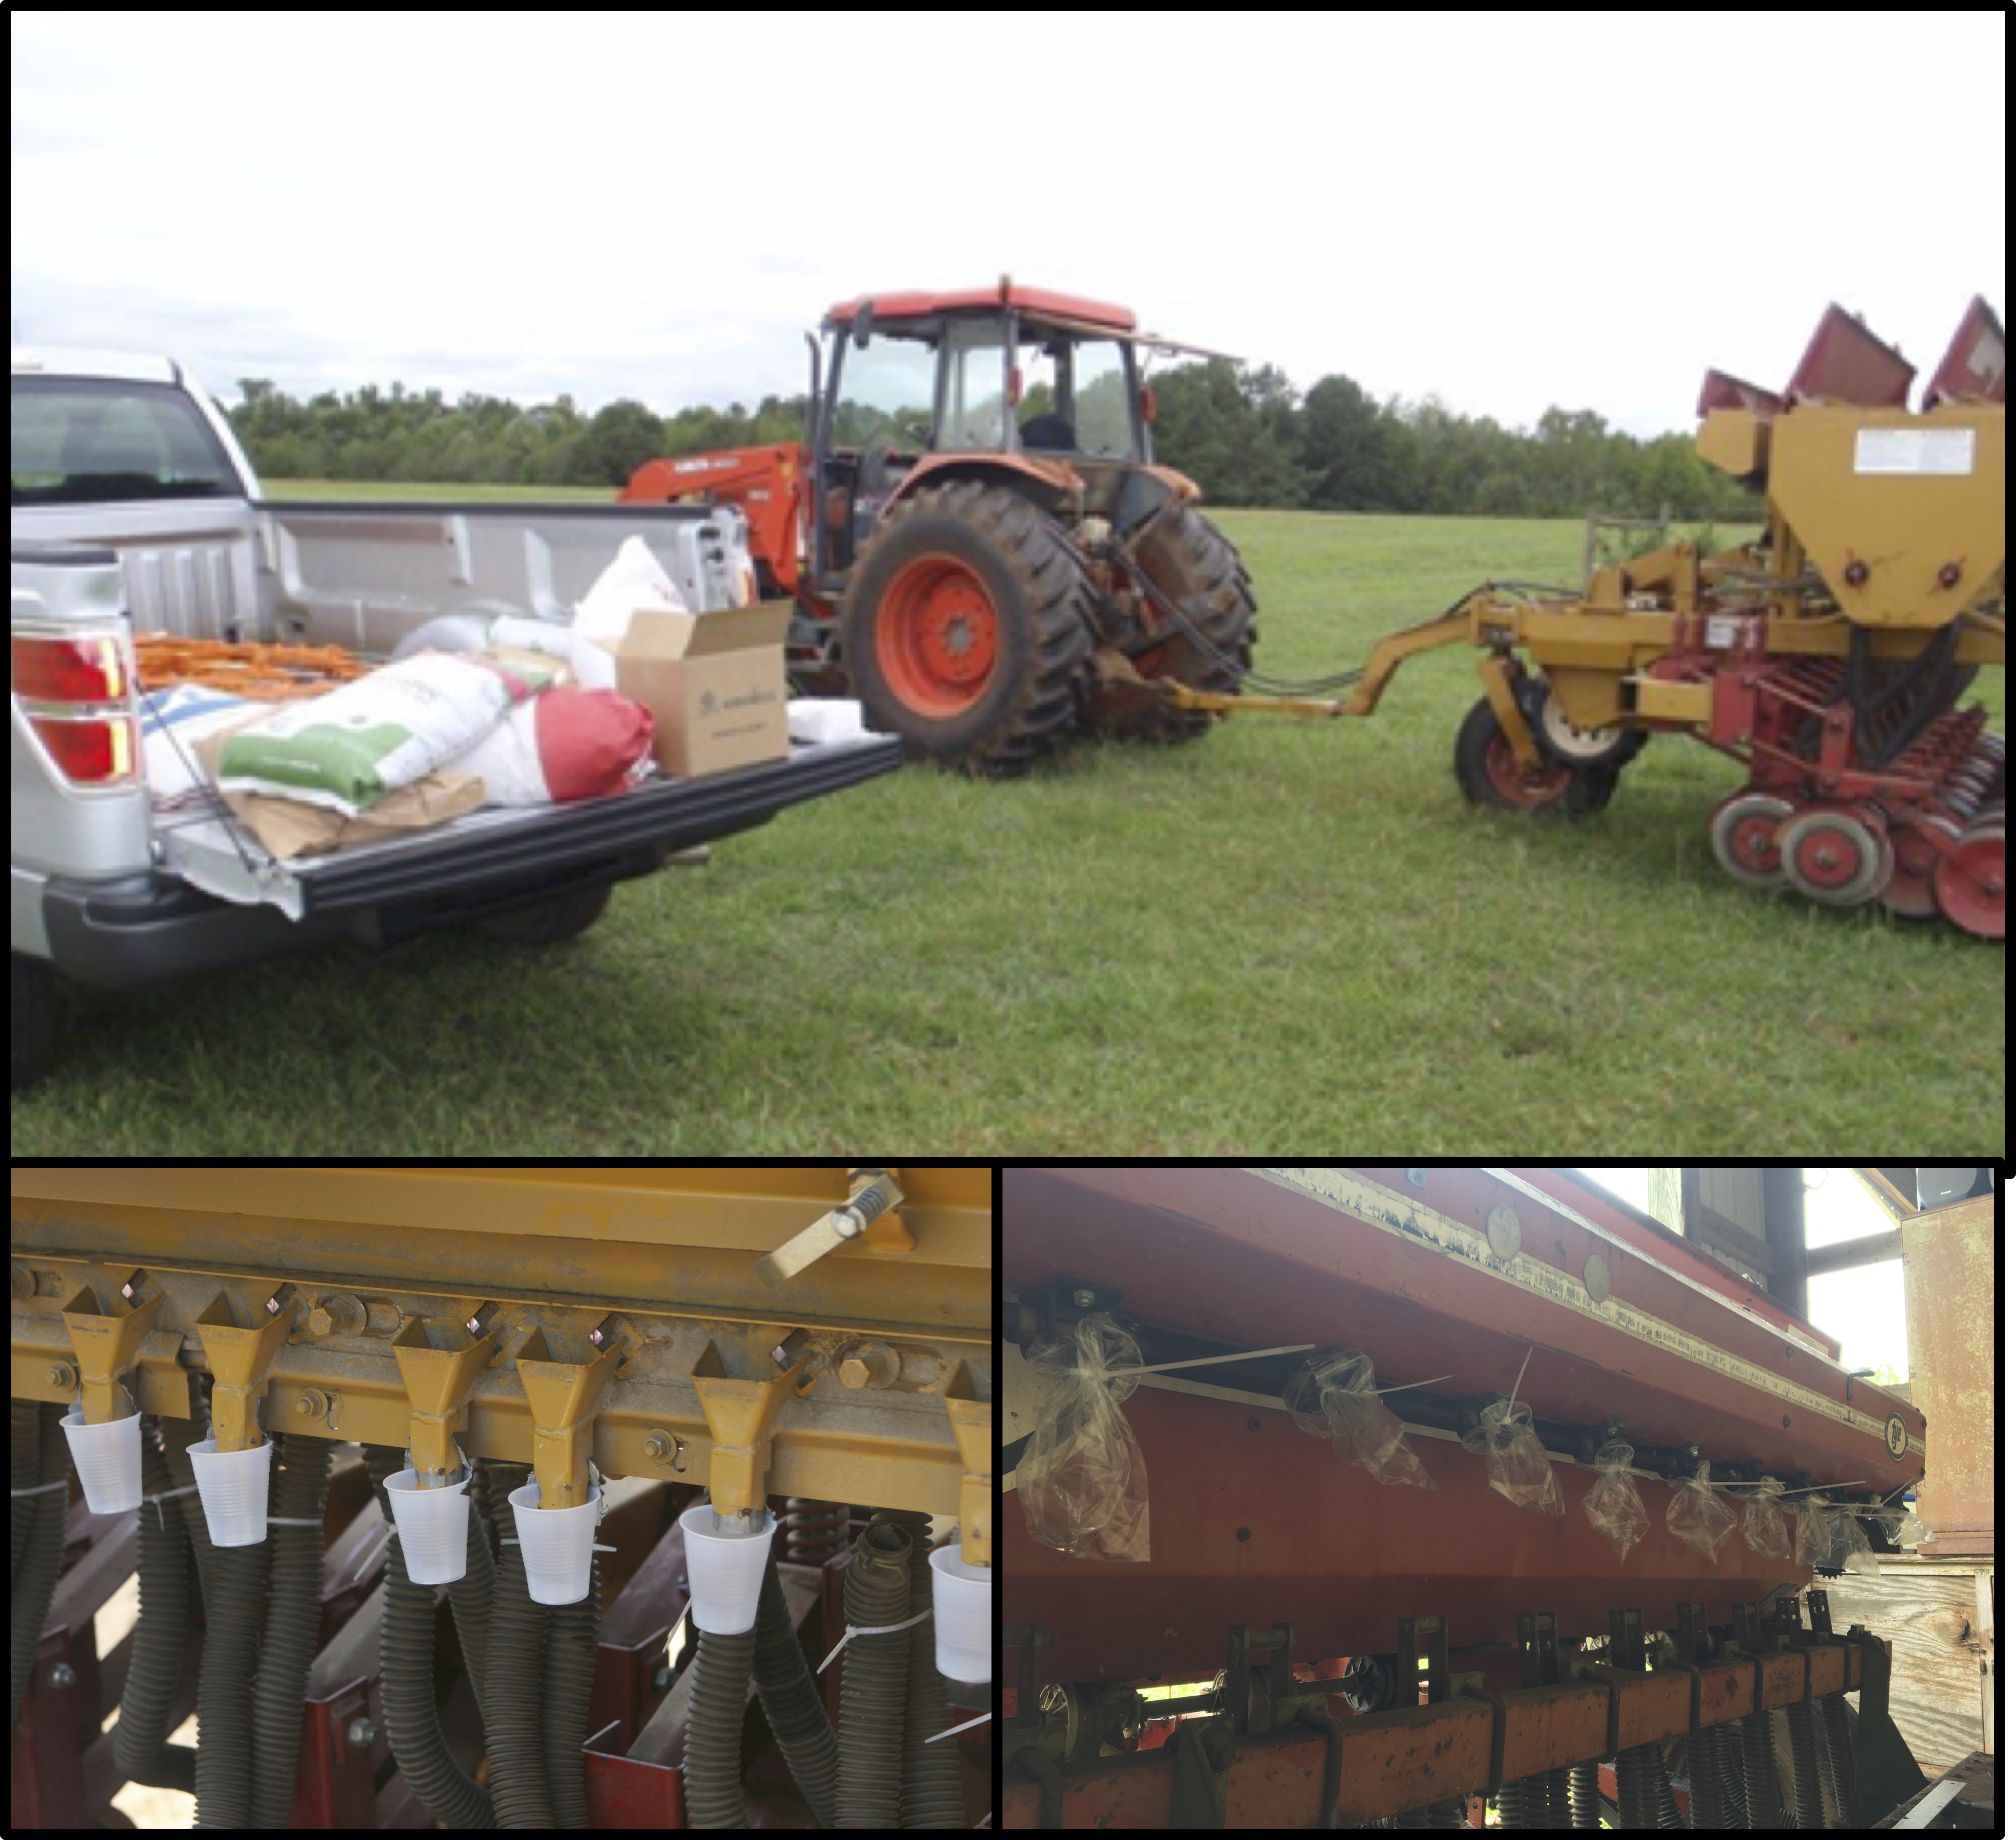 Three panels showing a seed drill. The first shows the drill attached to a tractor with supplies in a truck bed. The second shows the drill with plastic cups attached to the metering units to catch the seed. The third shows a similar setup to the second image, but with plastic bags to catch seed instead of cups.